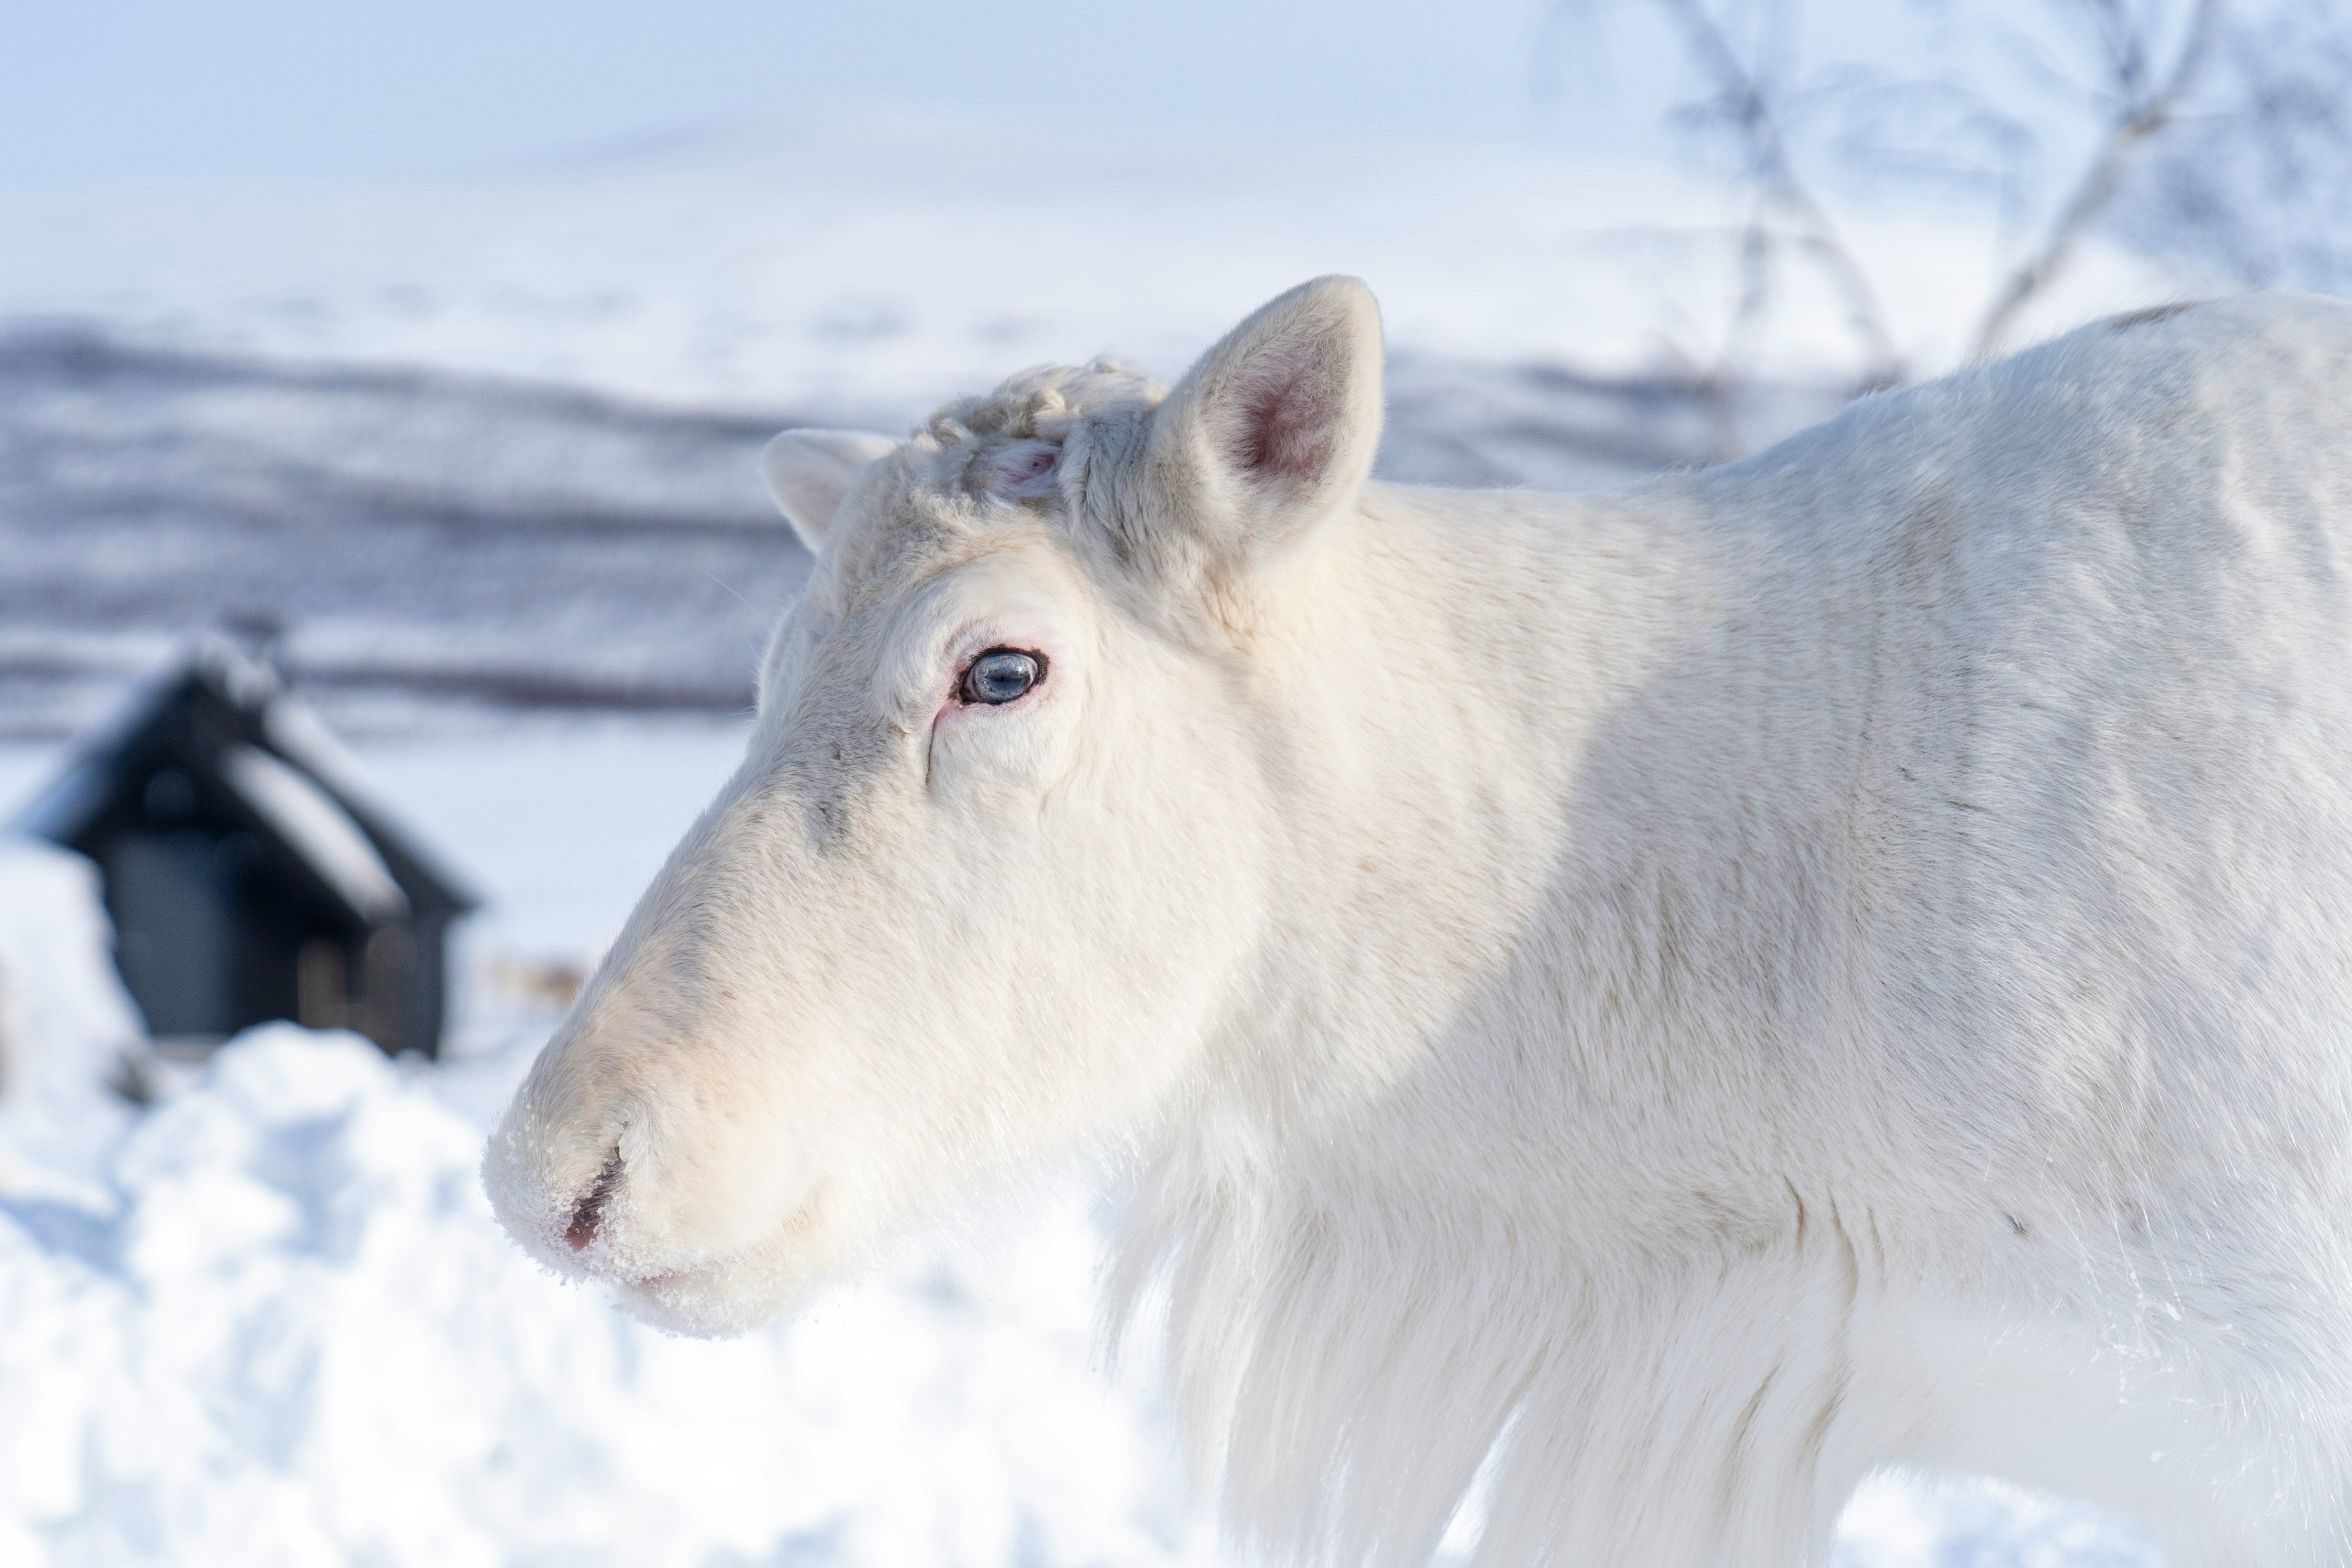 white horse on snow covered ground during daytime